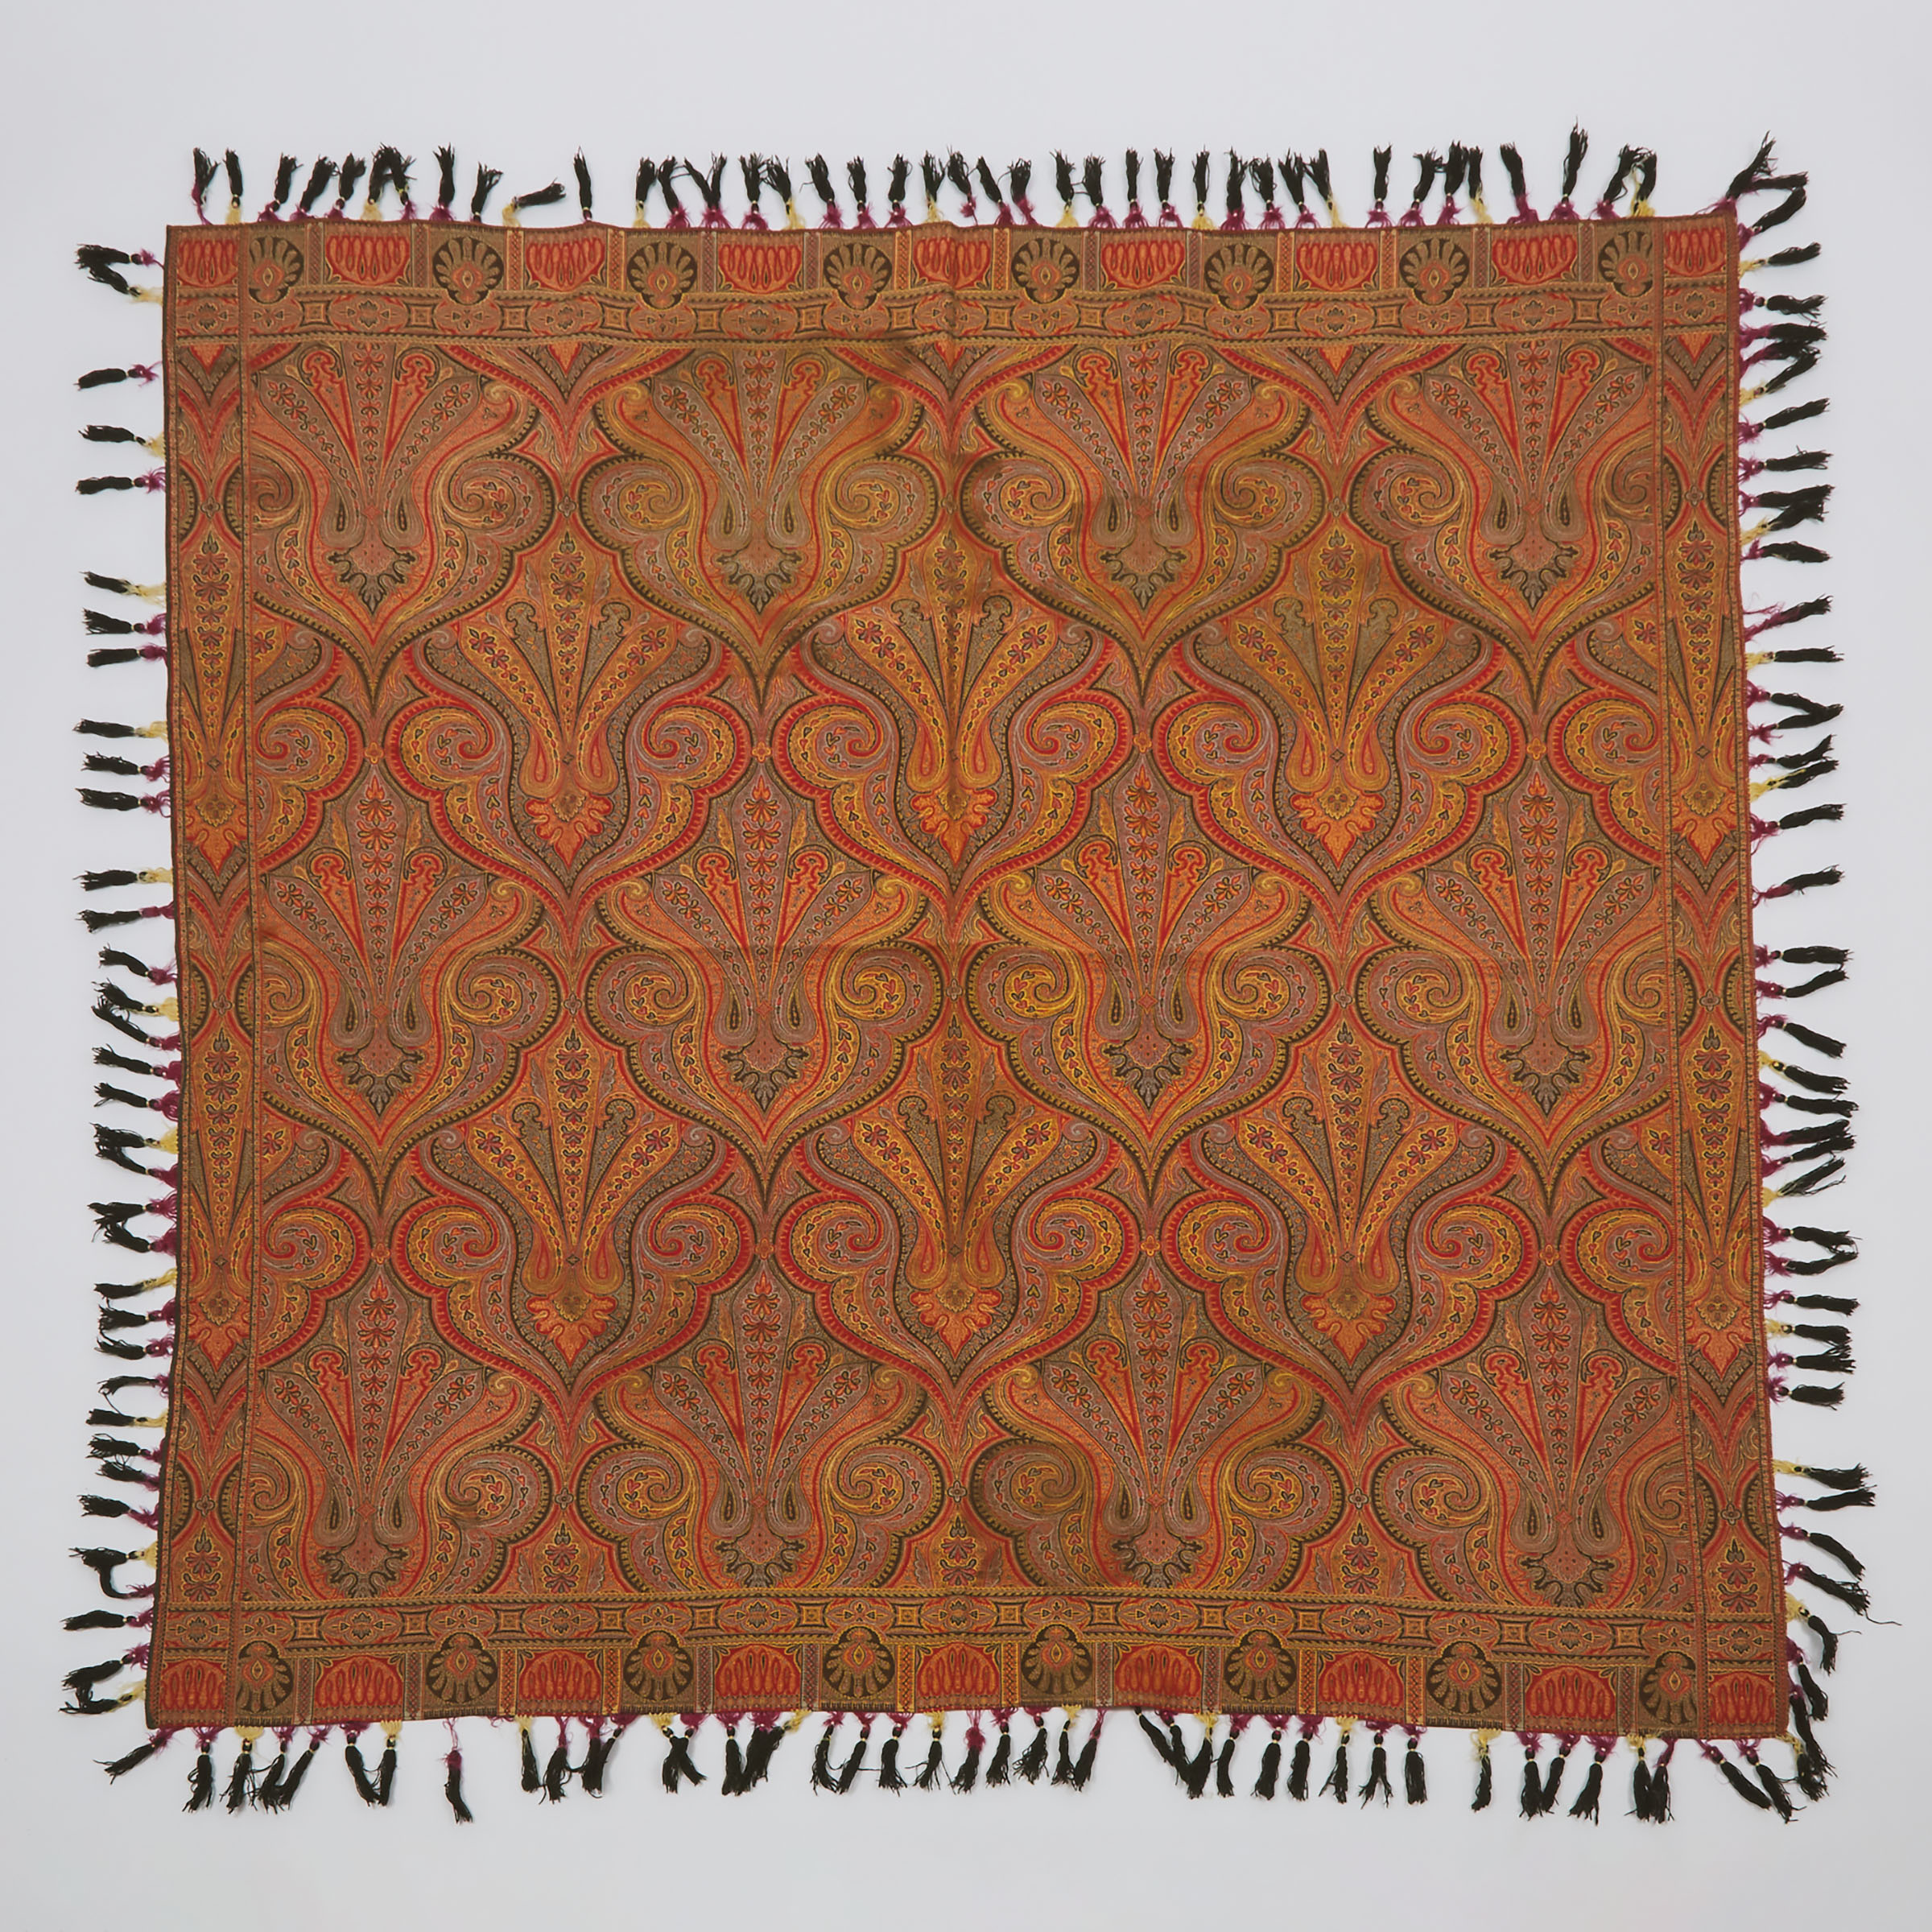 A Large Shawl, Probably Kashmir, Late 19th Century